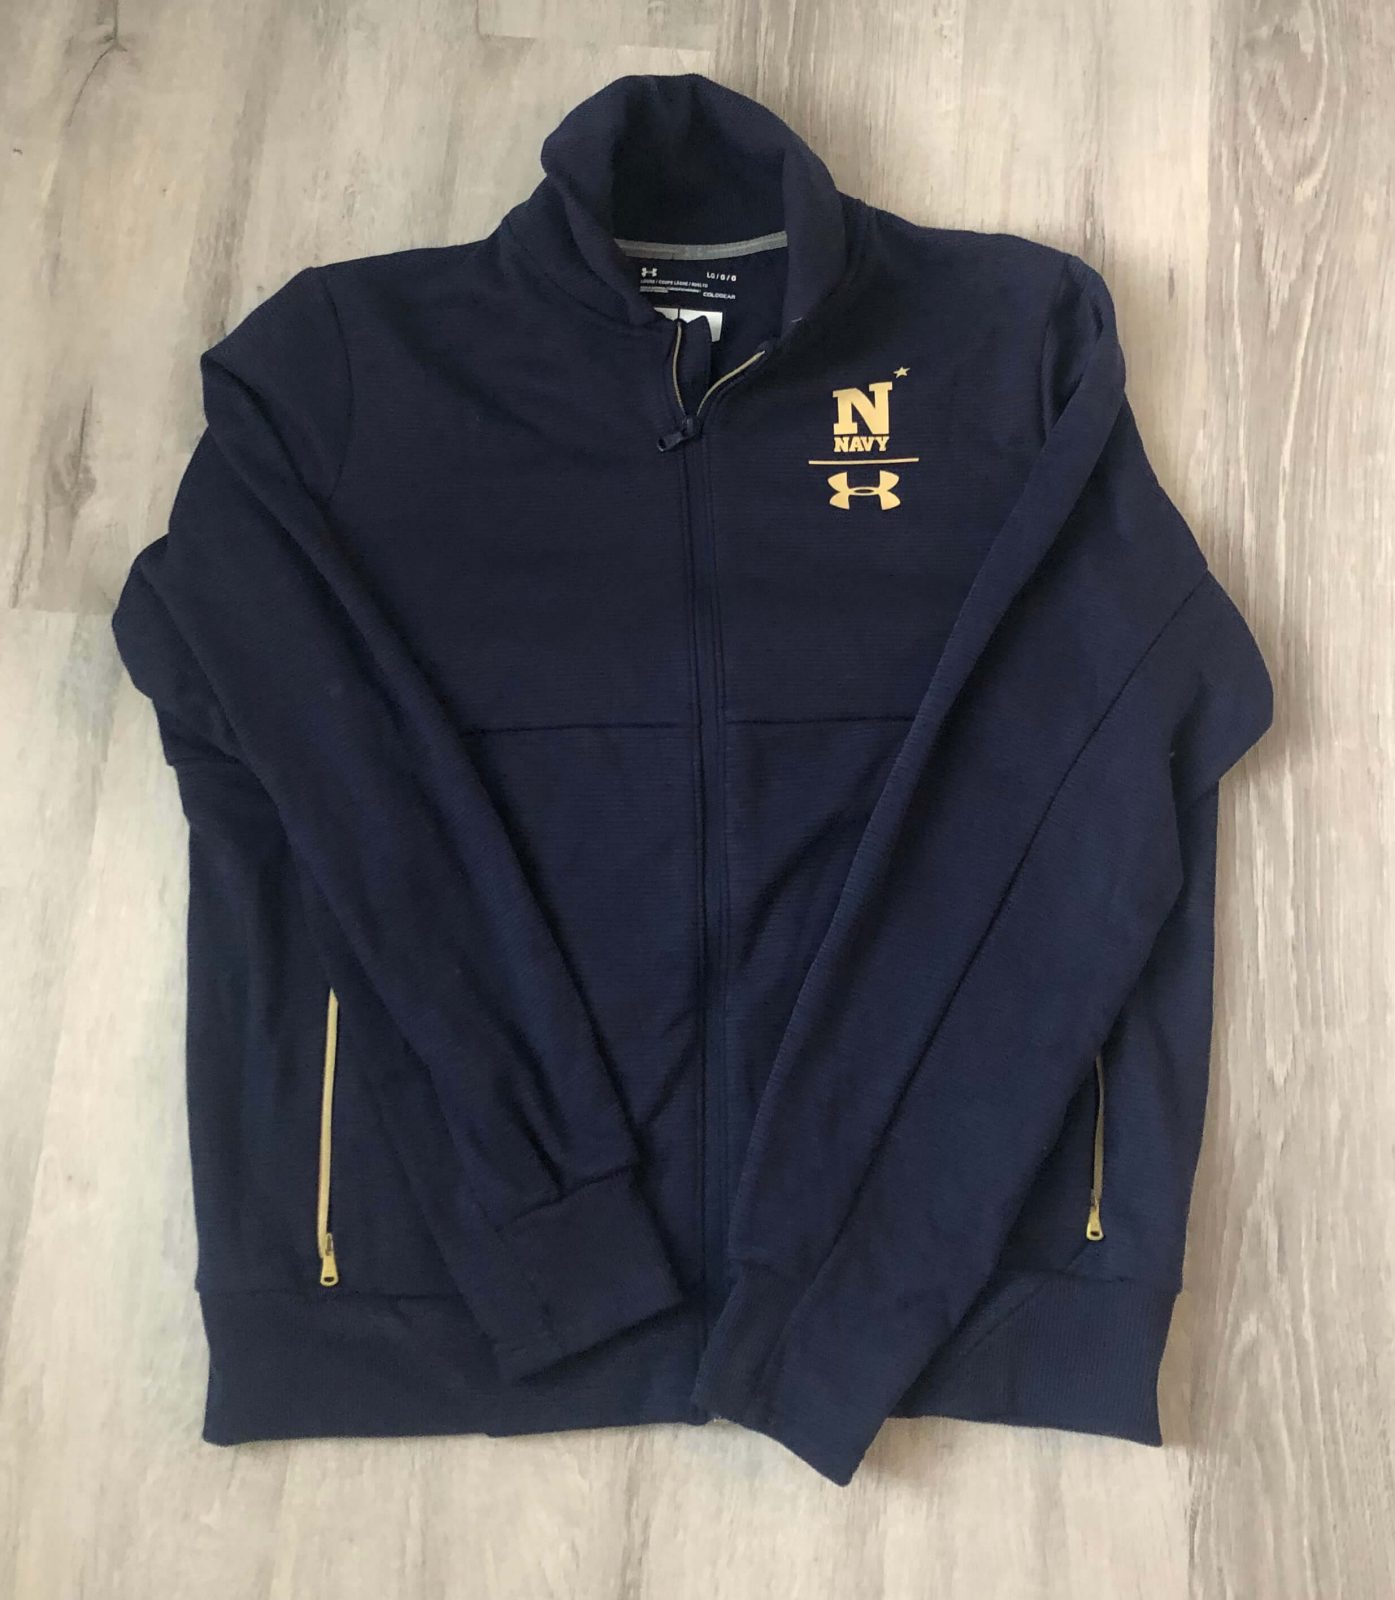 US Naval Academy Pullover : NARP Clothing